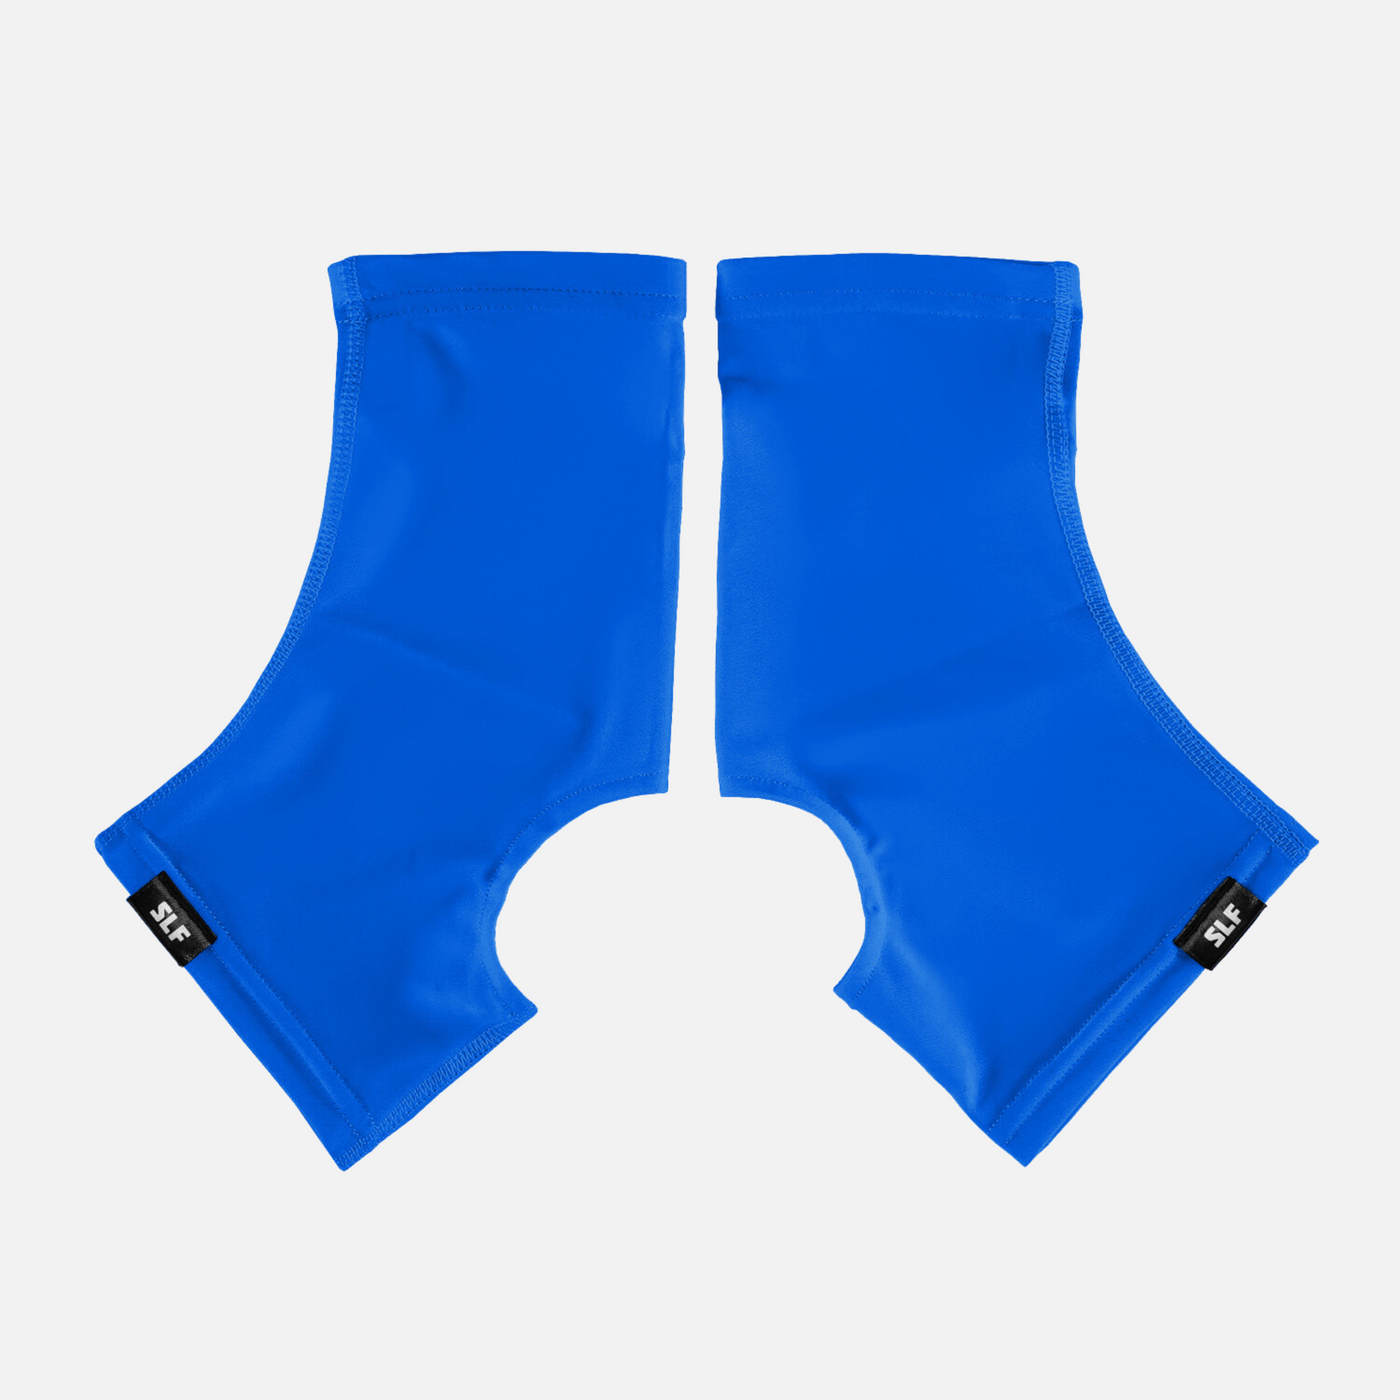 Hue Blue Spats / Cleat Covers - Big